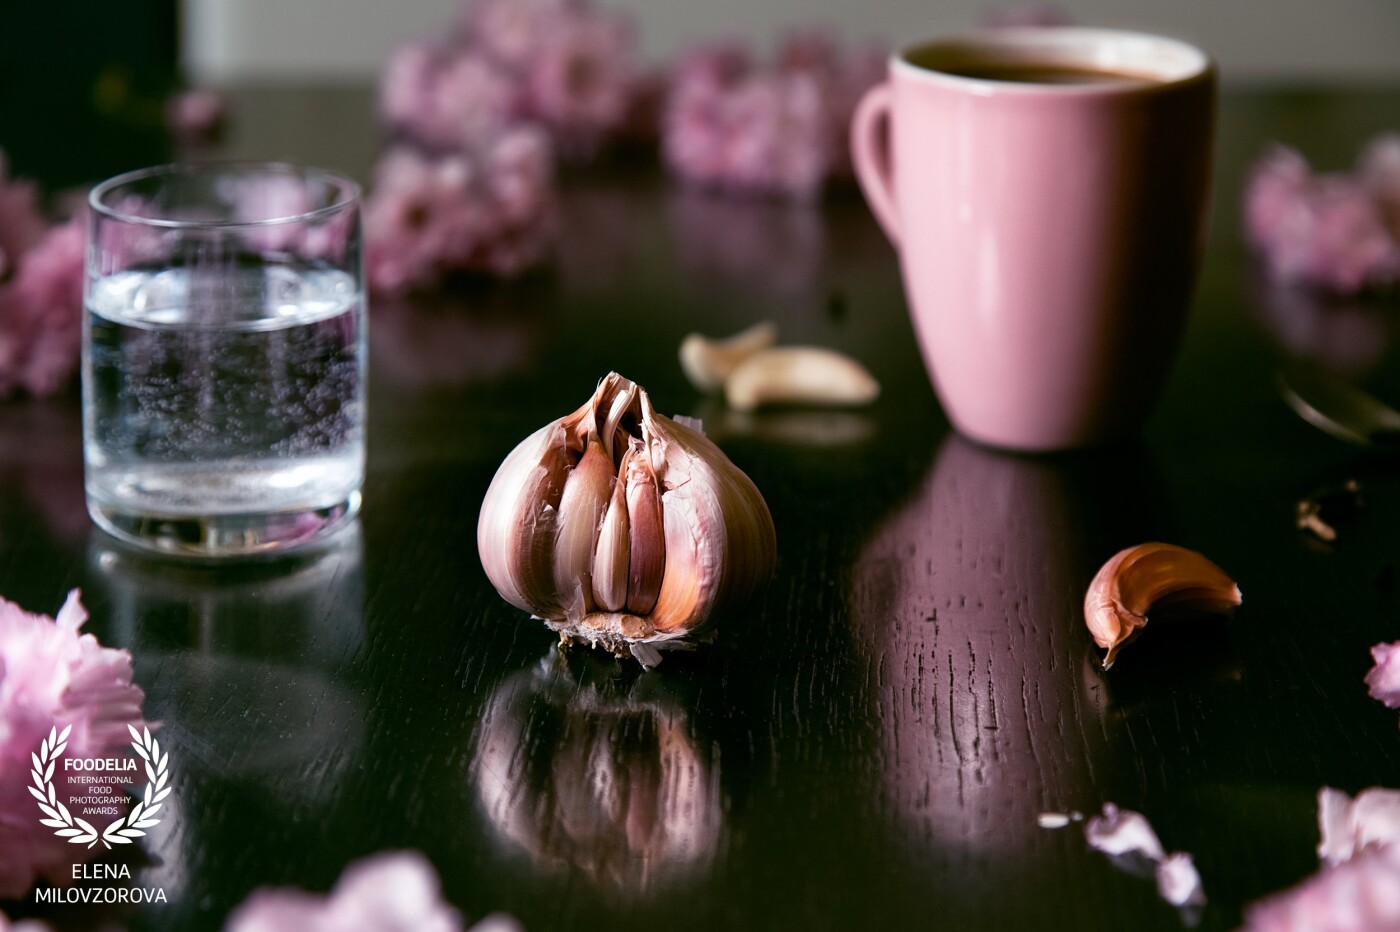 One morning I thought to myself, if coffee could come with garlic. It turned out that such a recipe had been thought of long before. And a blooming sakura added some "pink mood"